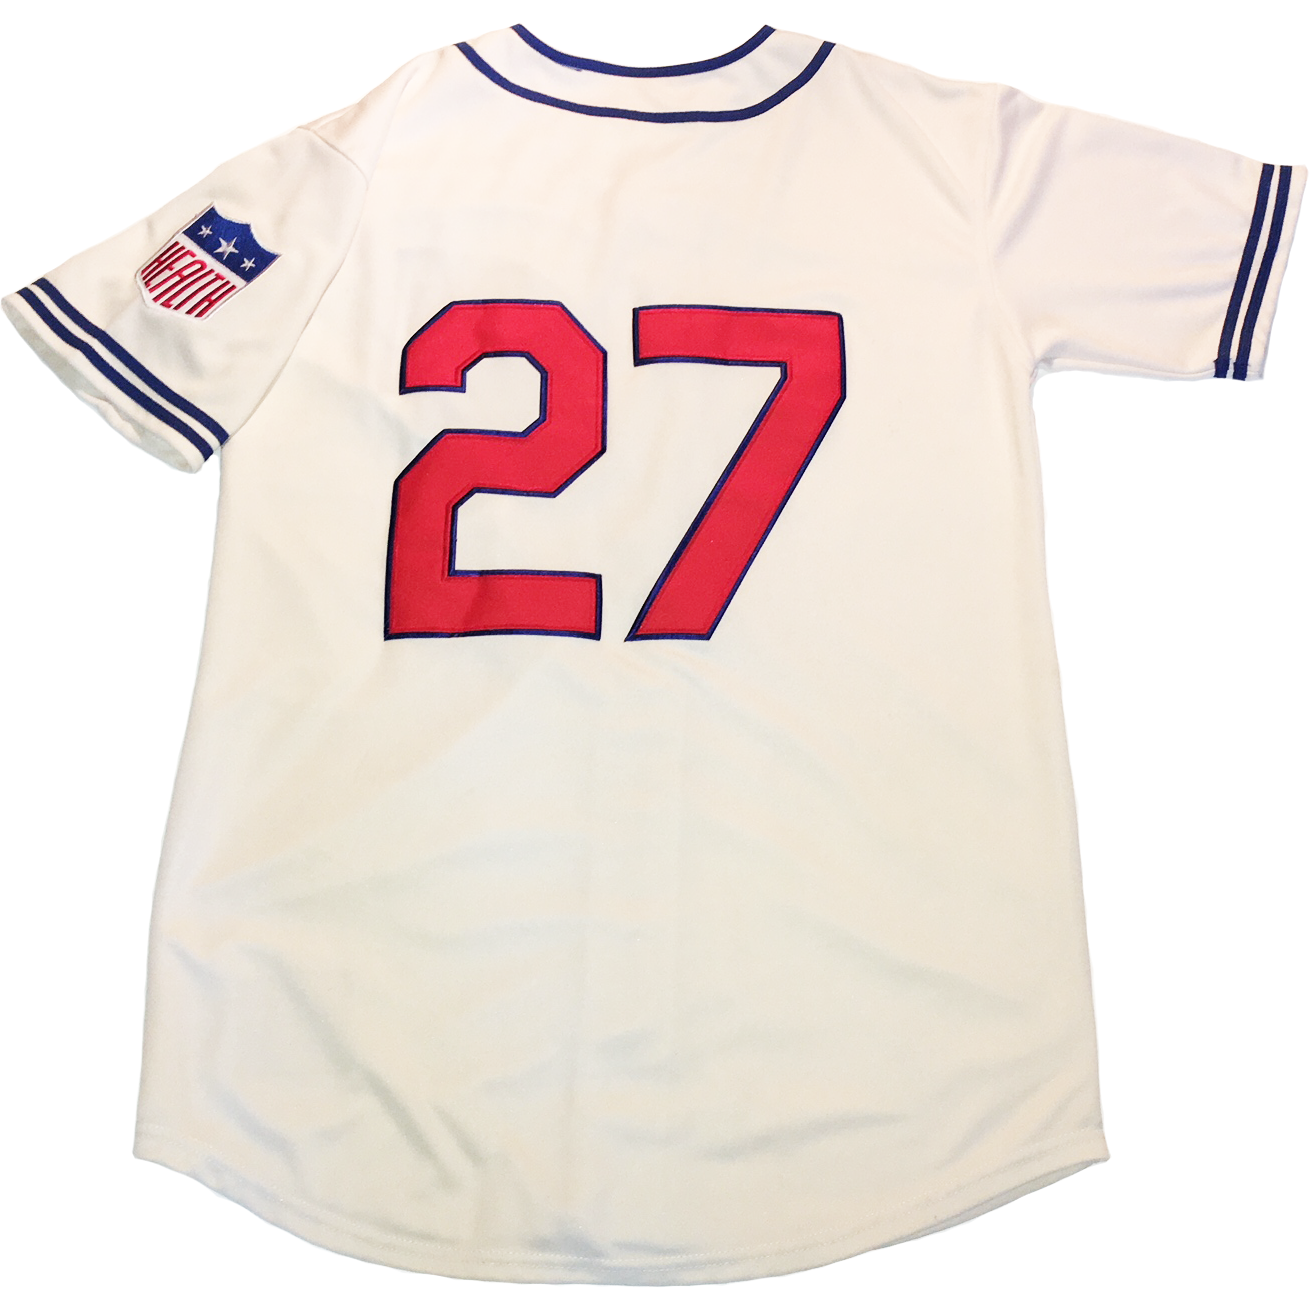 california angels throwback jersey